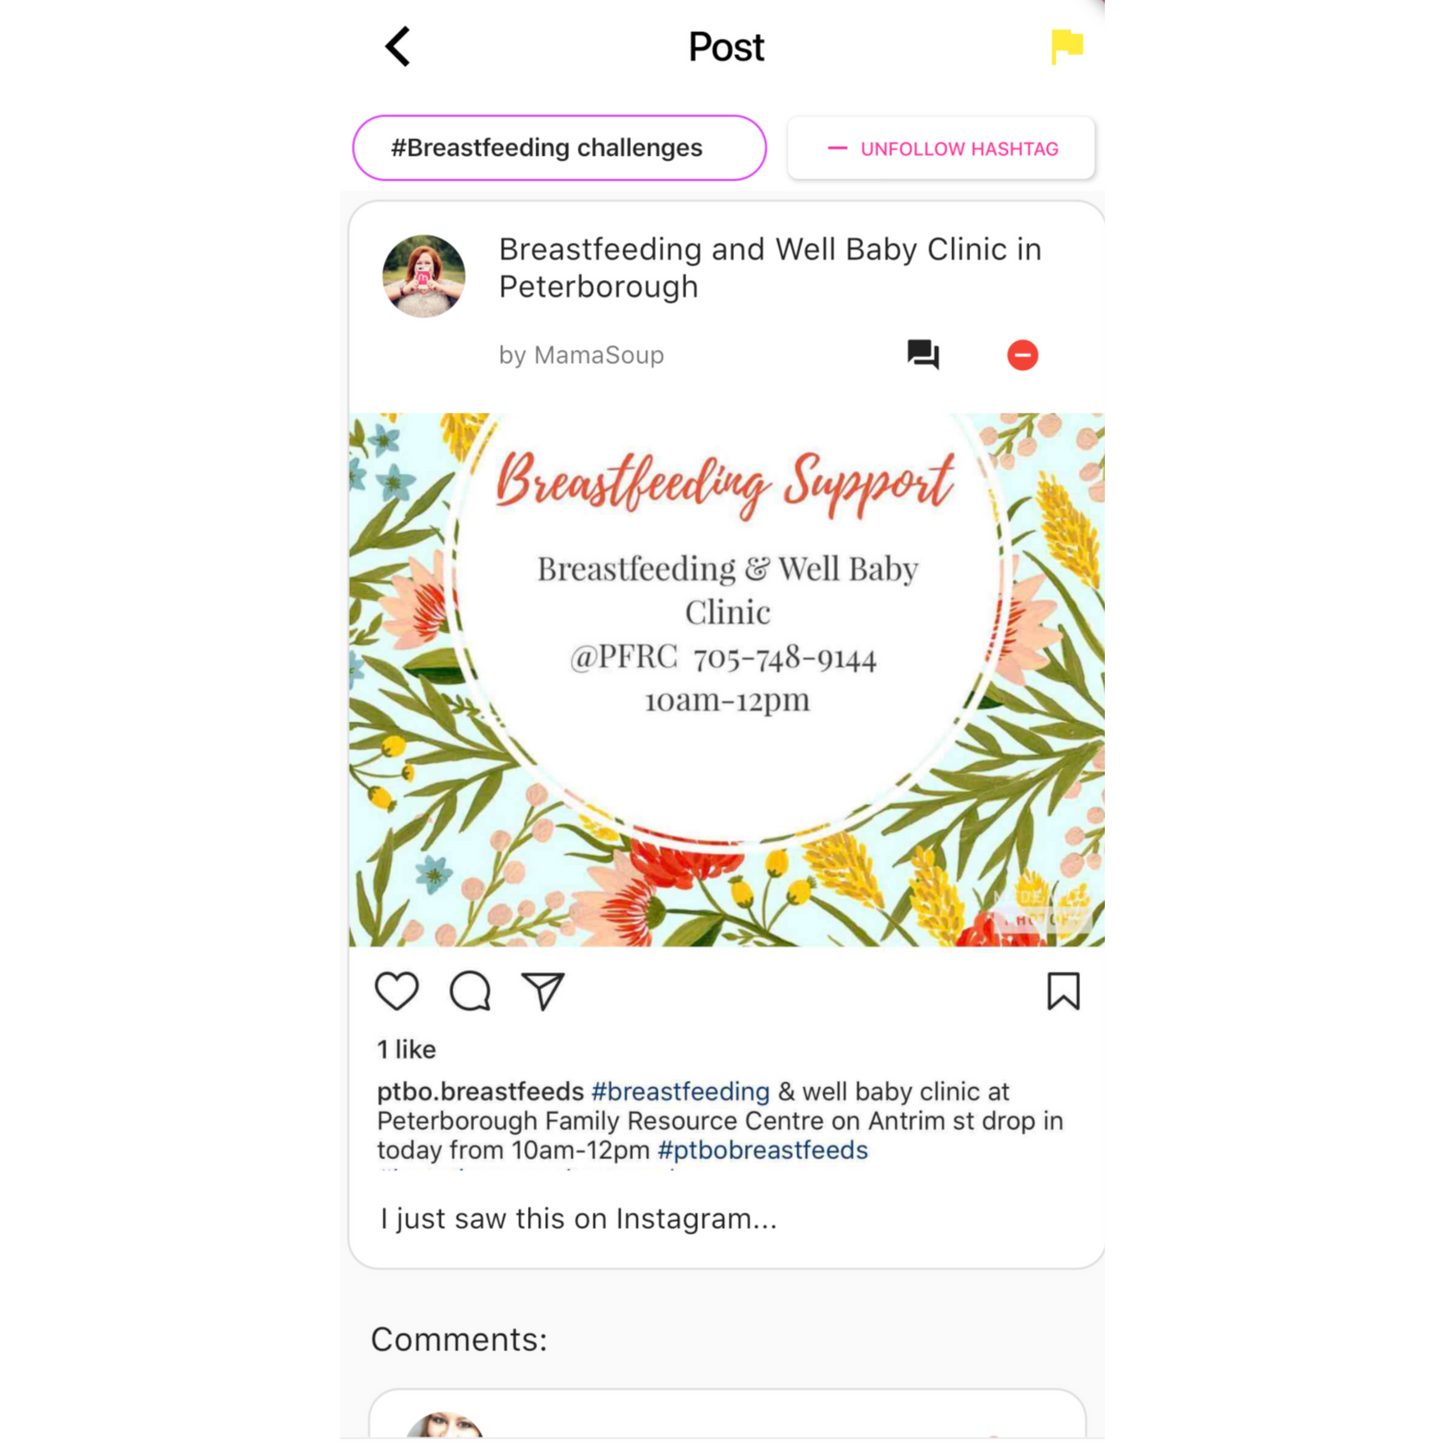 Image of a post on the Mamasoup app under the hashtag Breastfeeding Challenges and an image of a breastfeeding clinic happening in Peterborough, Ontario.